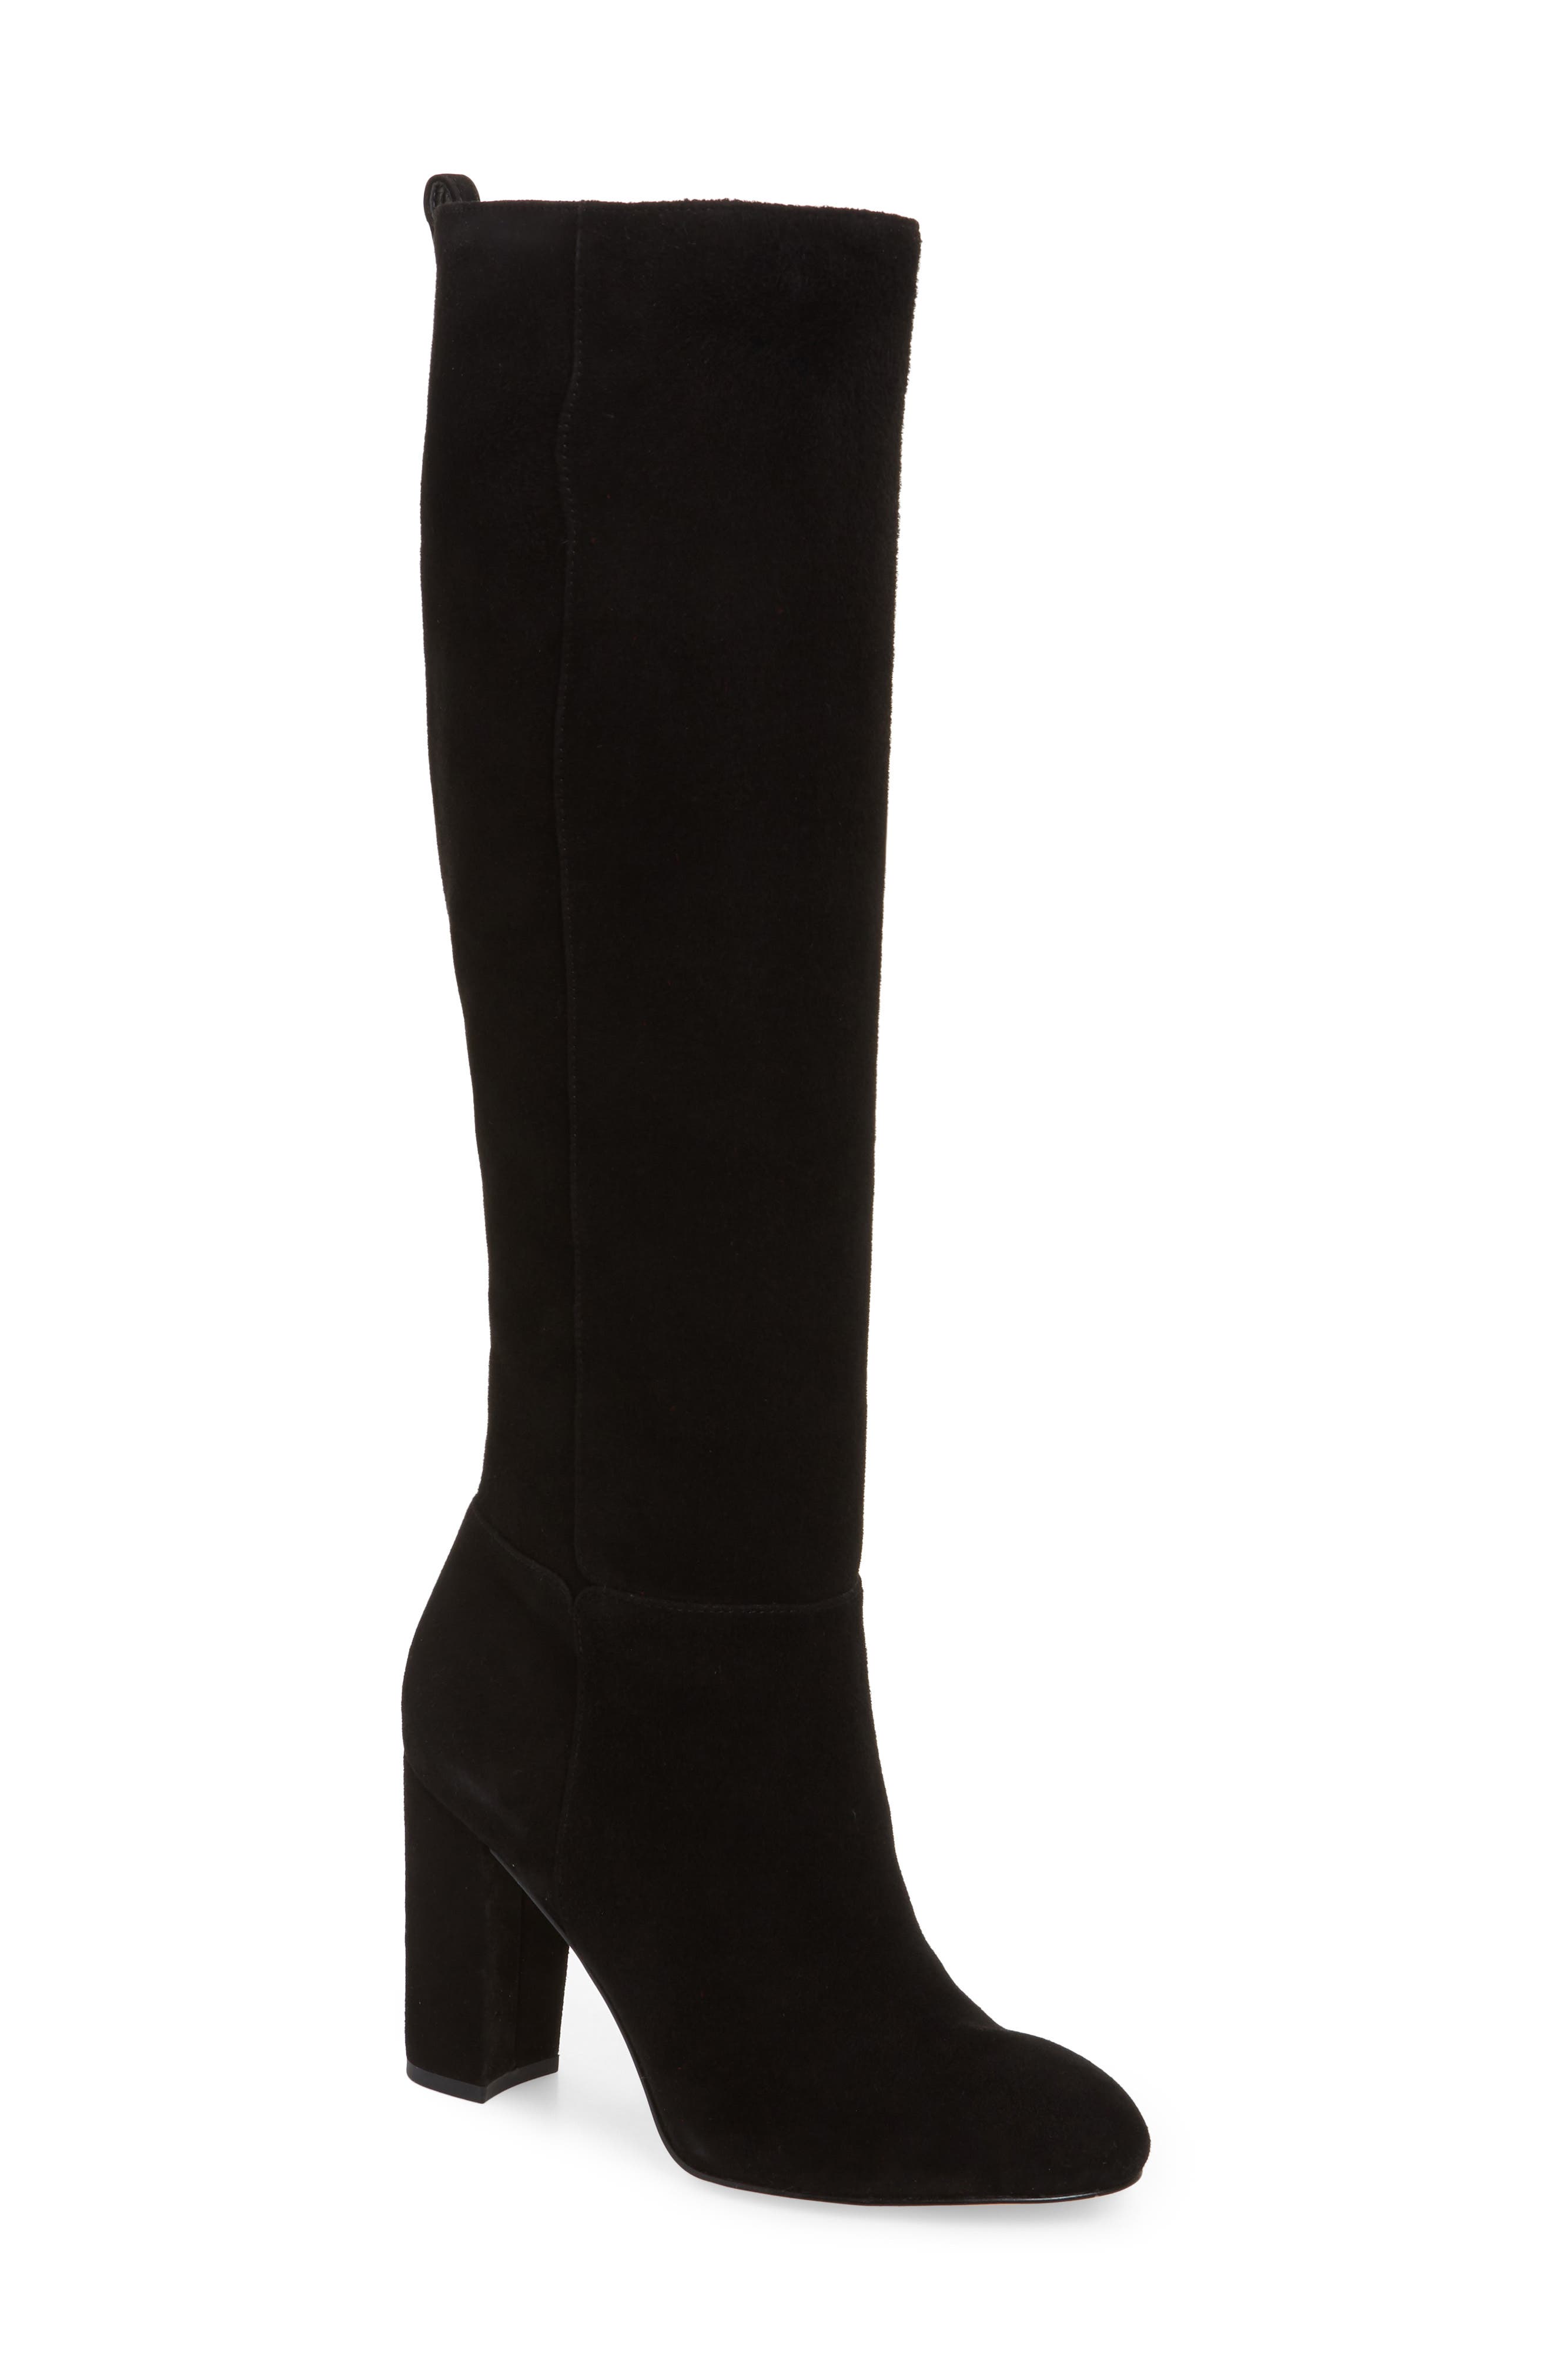 caprice knee high boots